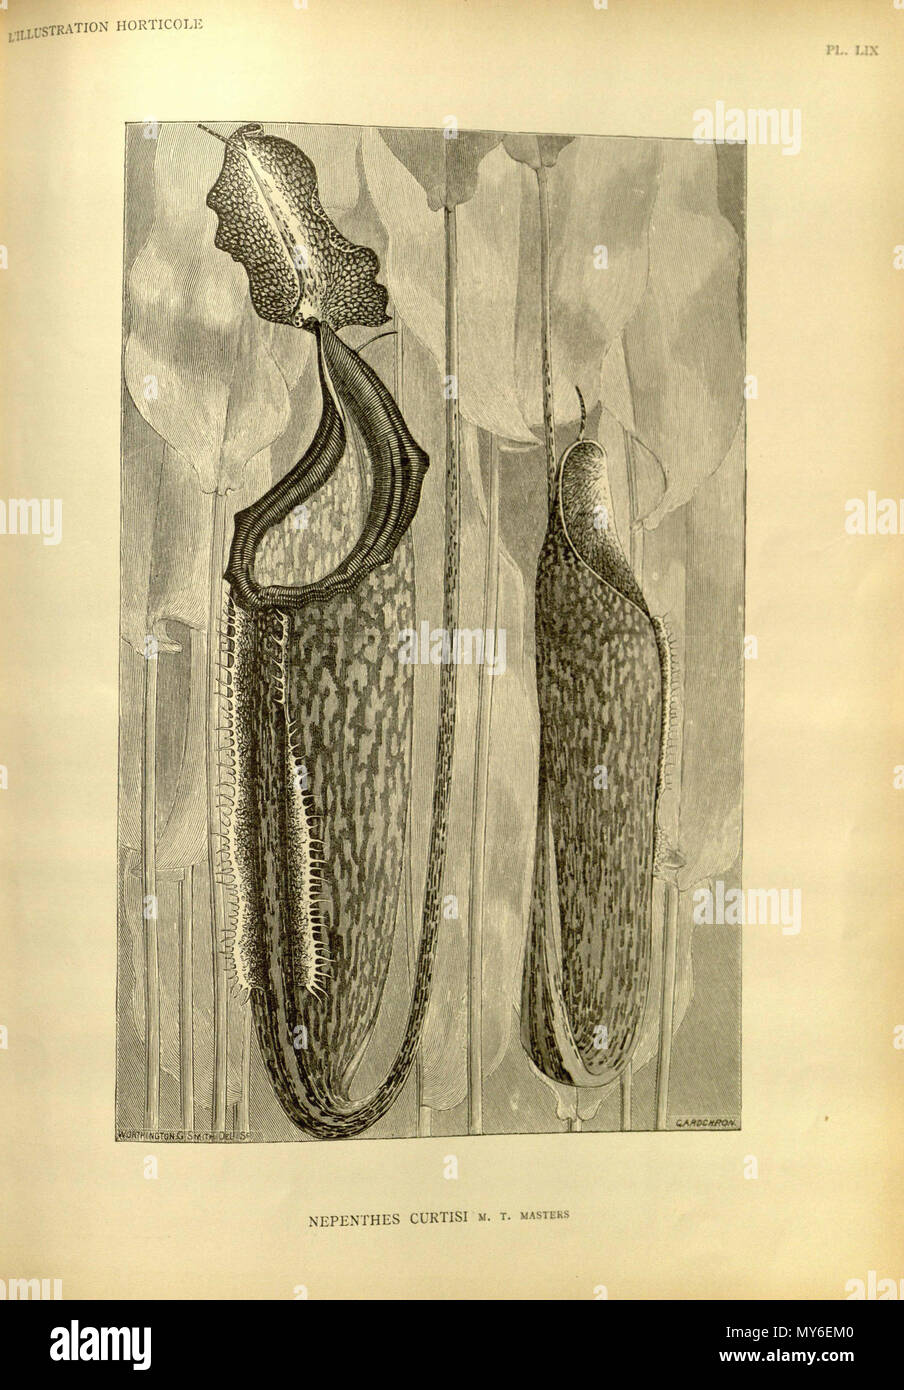 384 Nepenthes curtisii - L’Illustration horticole (1888) Stock Photo